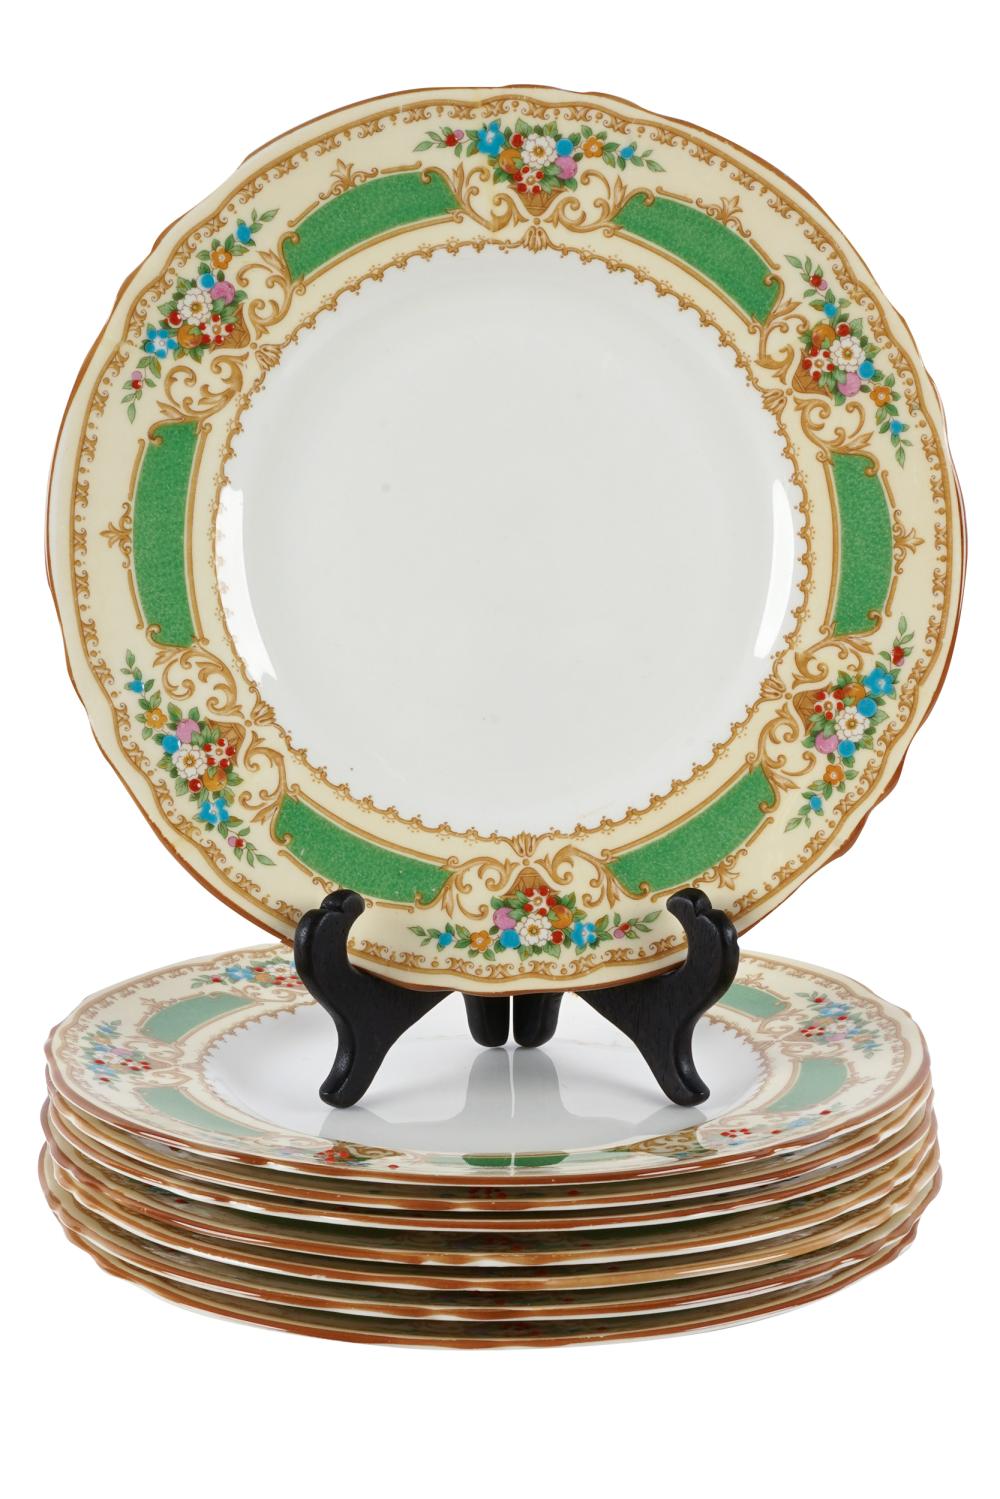 SET OF 11 CROWN STAFFORDSHIRE PLATES20th 333101